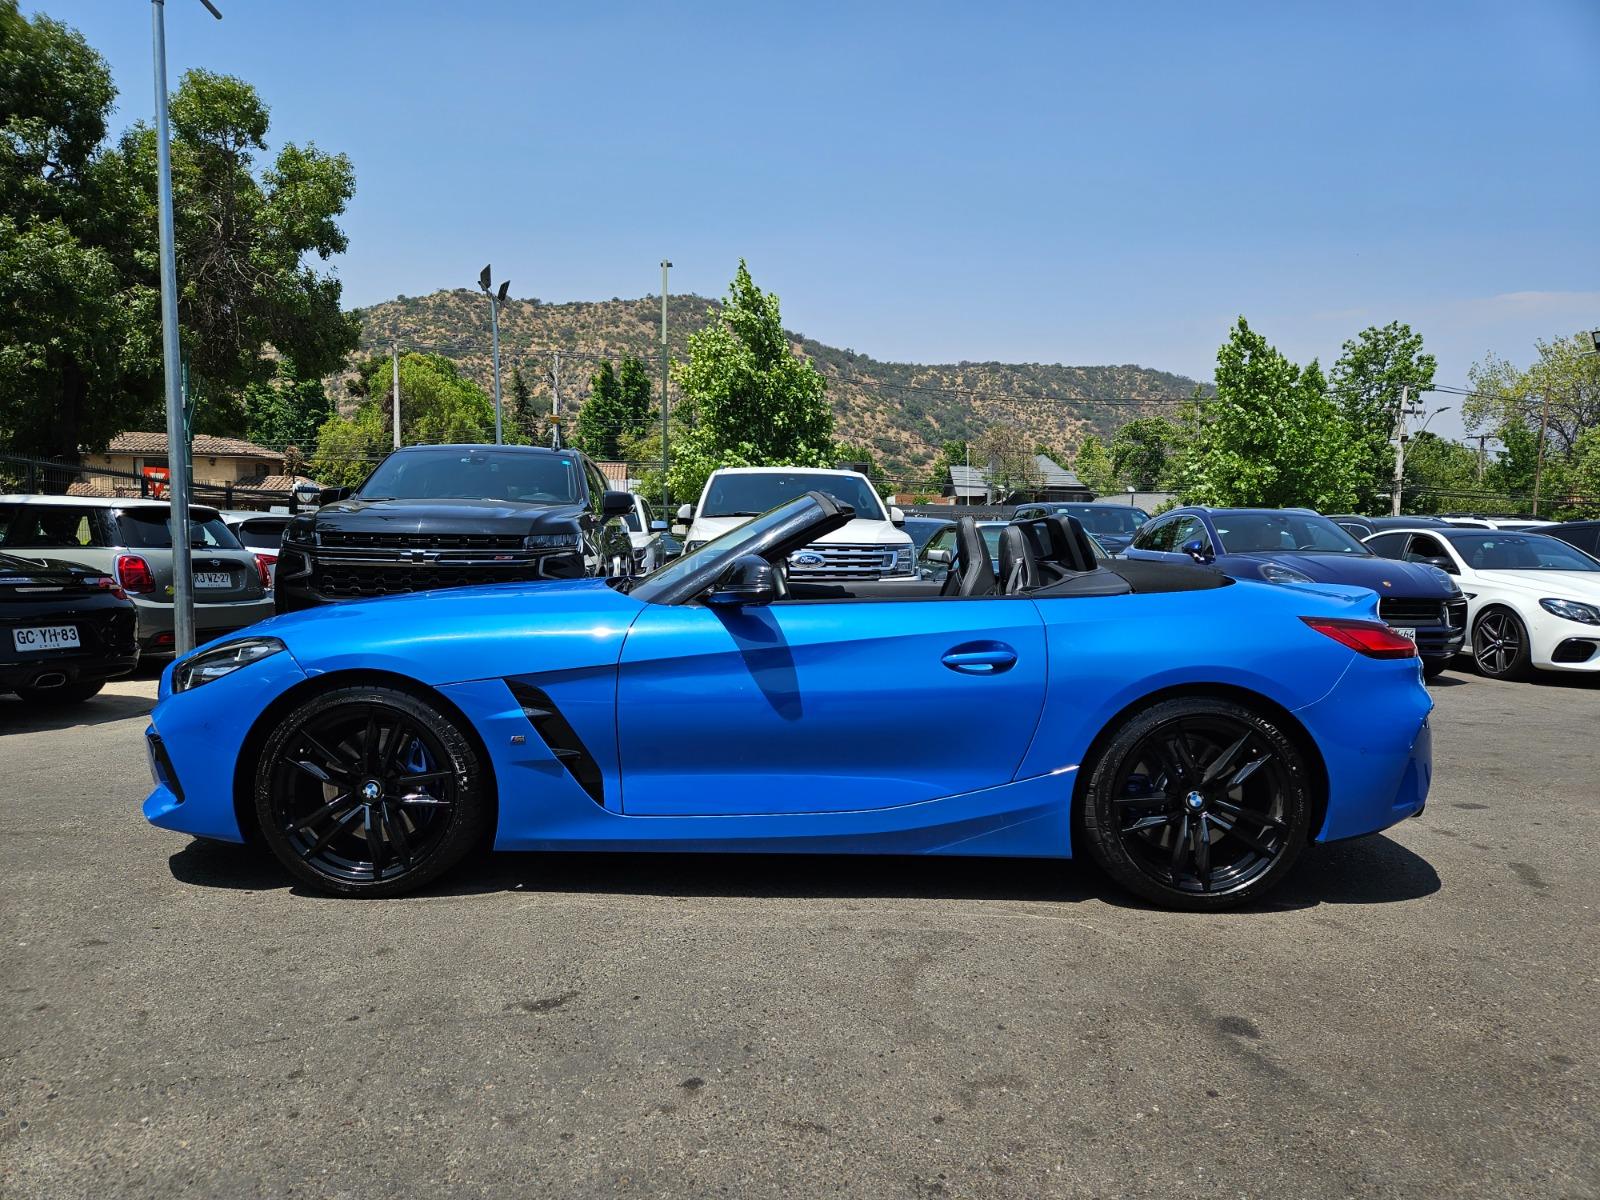 BMW Z4 M40 3.0 ROADSTER 2022 IMPECABLE, POCO KM - FULL MOTOR